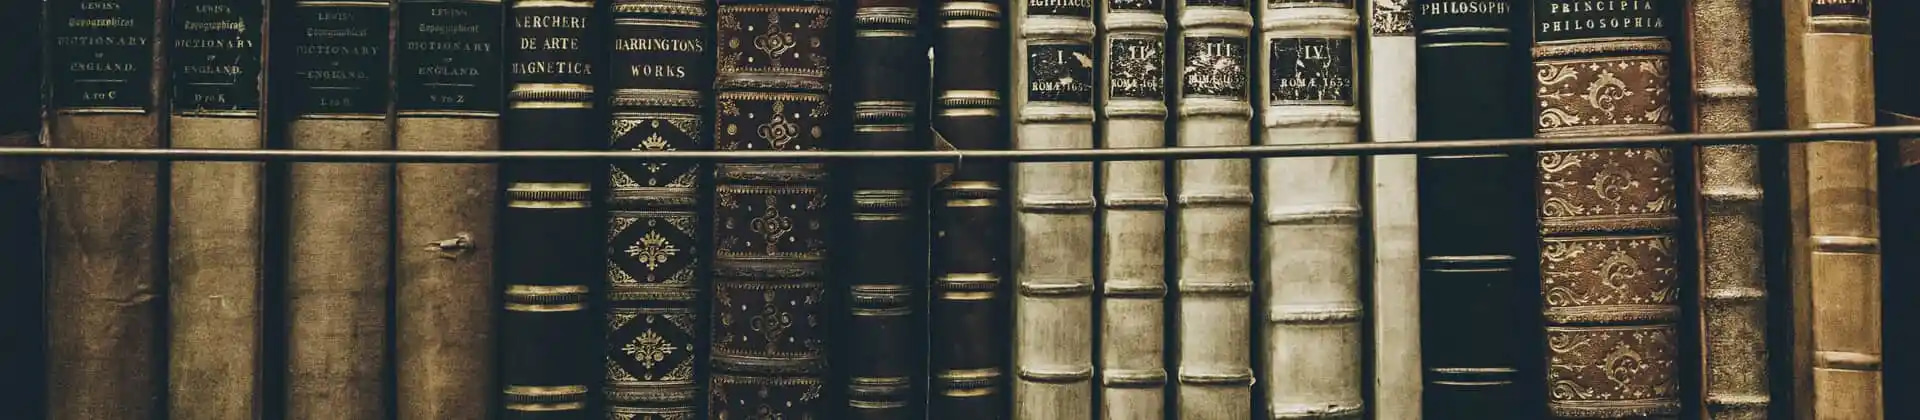 image of law books on library shelf 